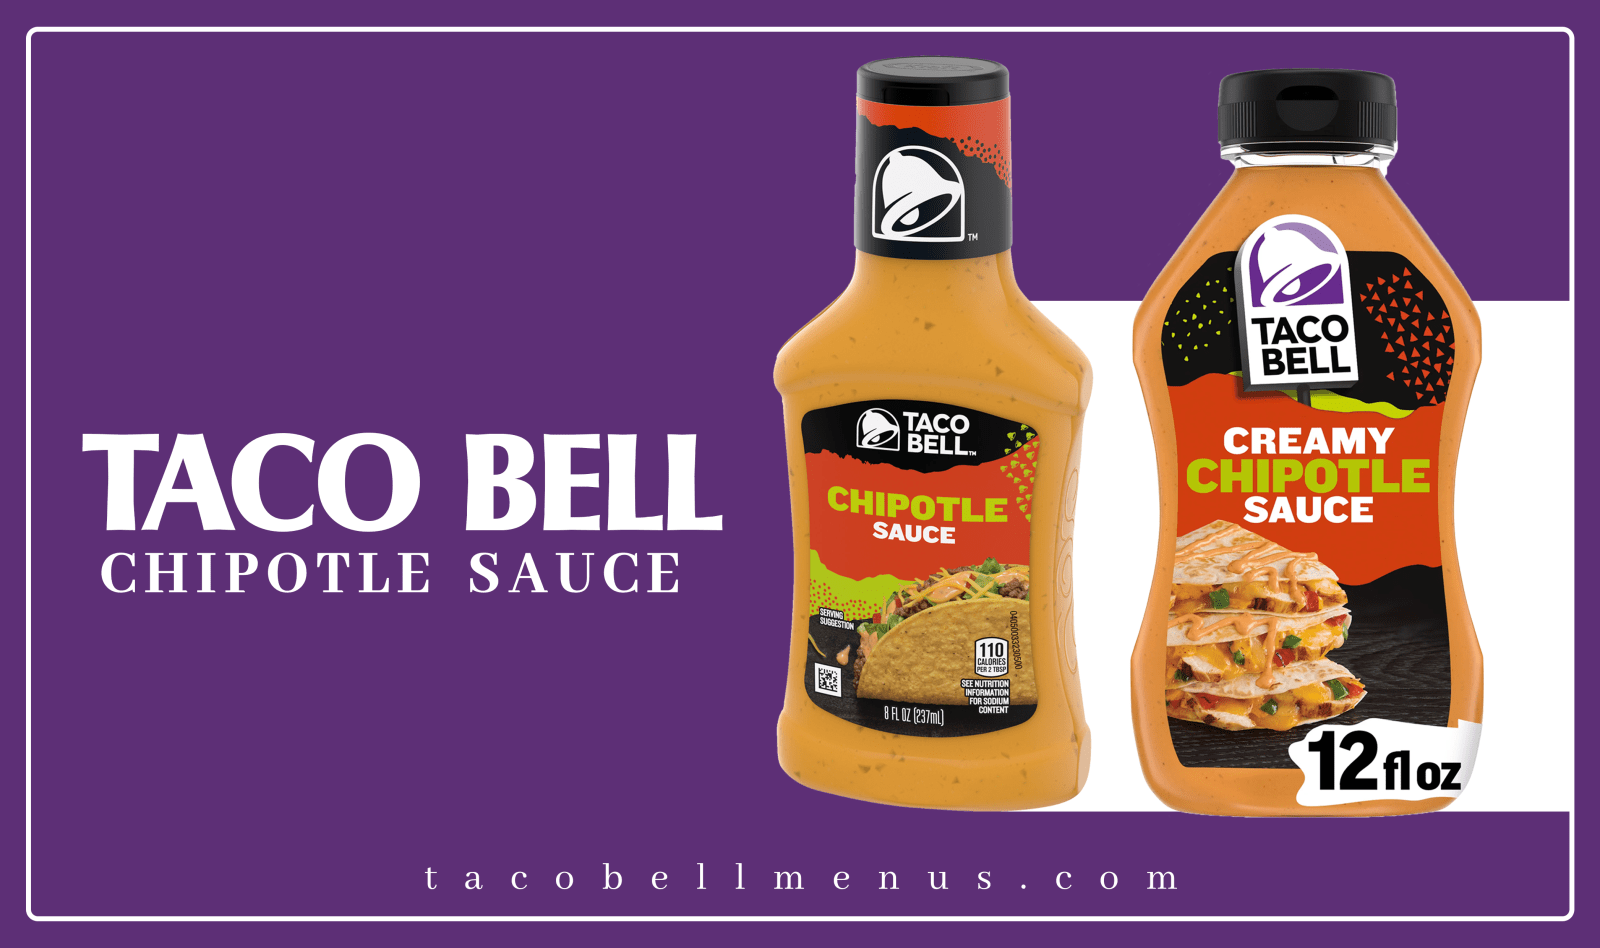 Taco Bell's Chipotle Sauce